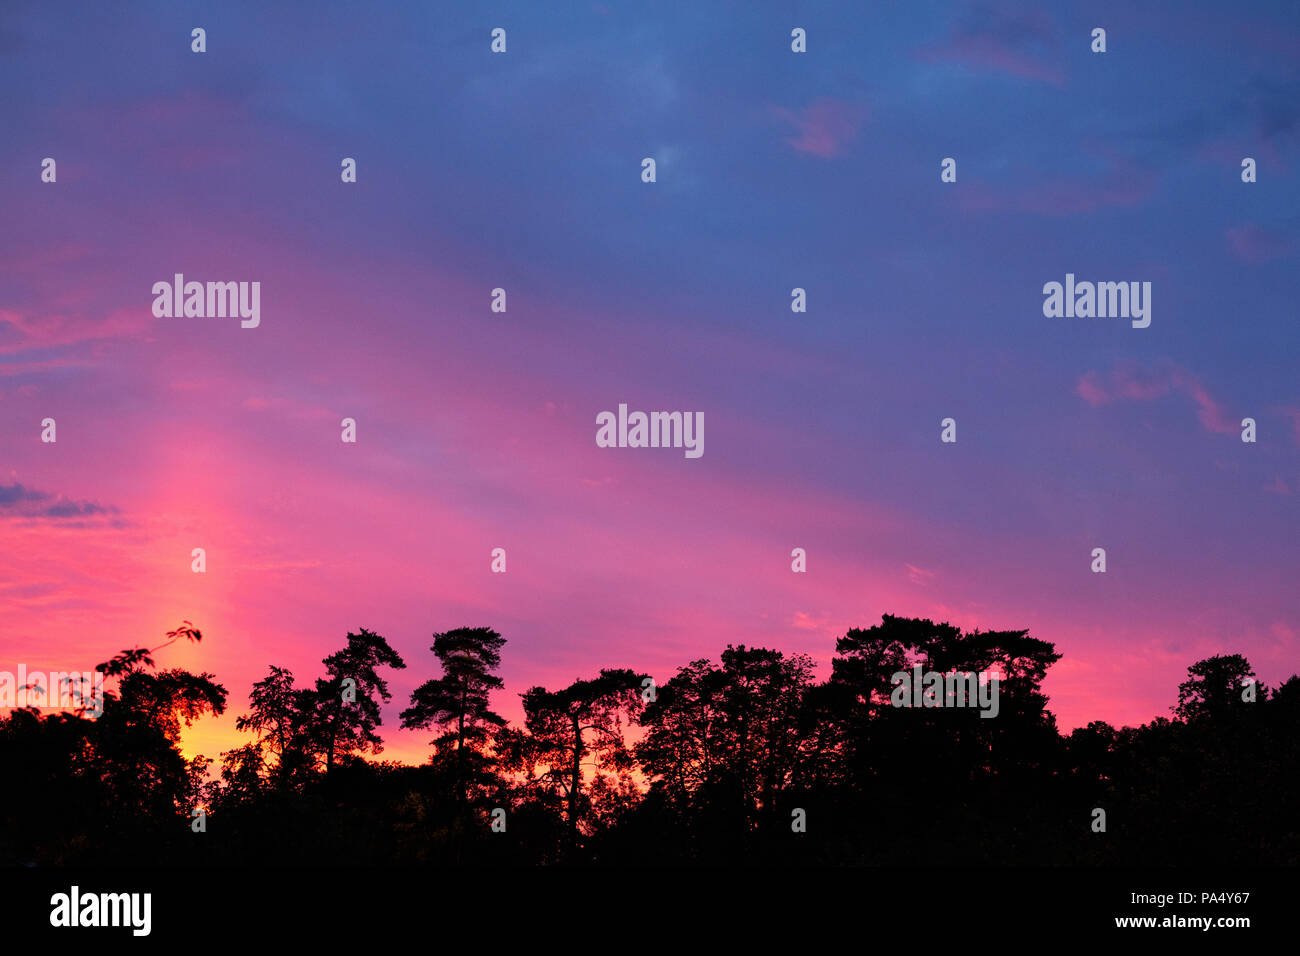 Dramatic and colourful sunset over a horizon of silhouetted trees Stock Photo